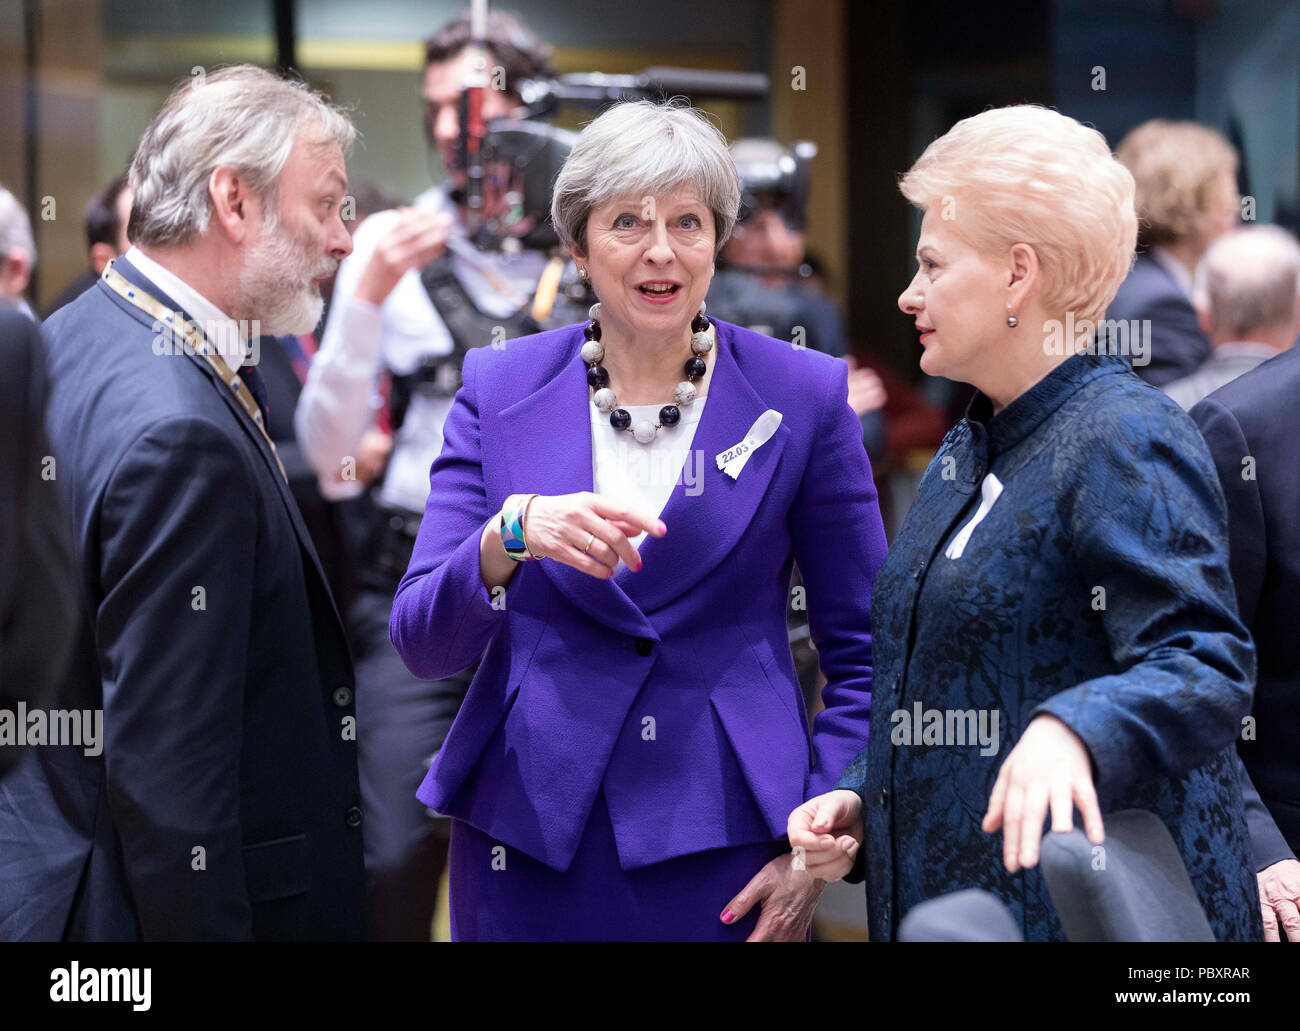 Belgium, Brussels on 2018/03/22: Summit of EU Heads of States. British Prime Minister Theresa May, Sir Timothy Earle and Dalia Grybauskaite Stock Photo